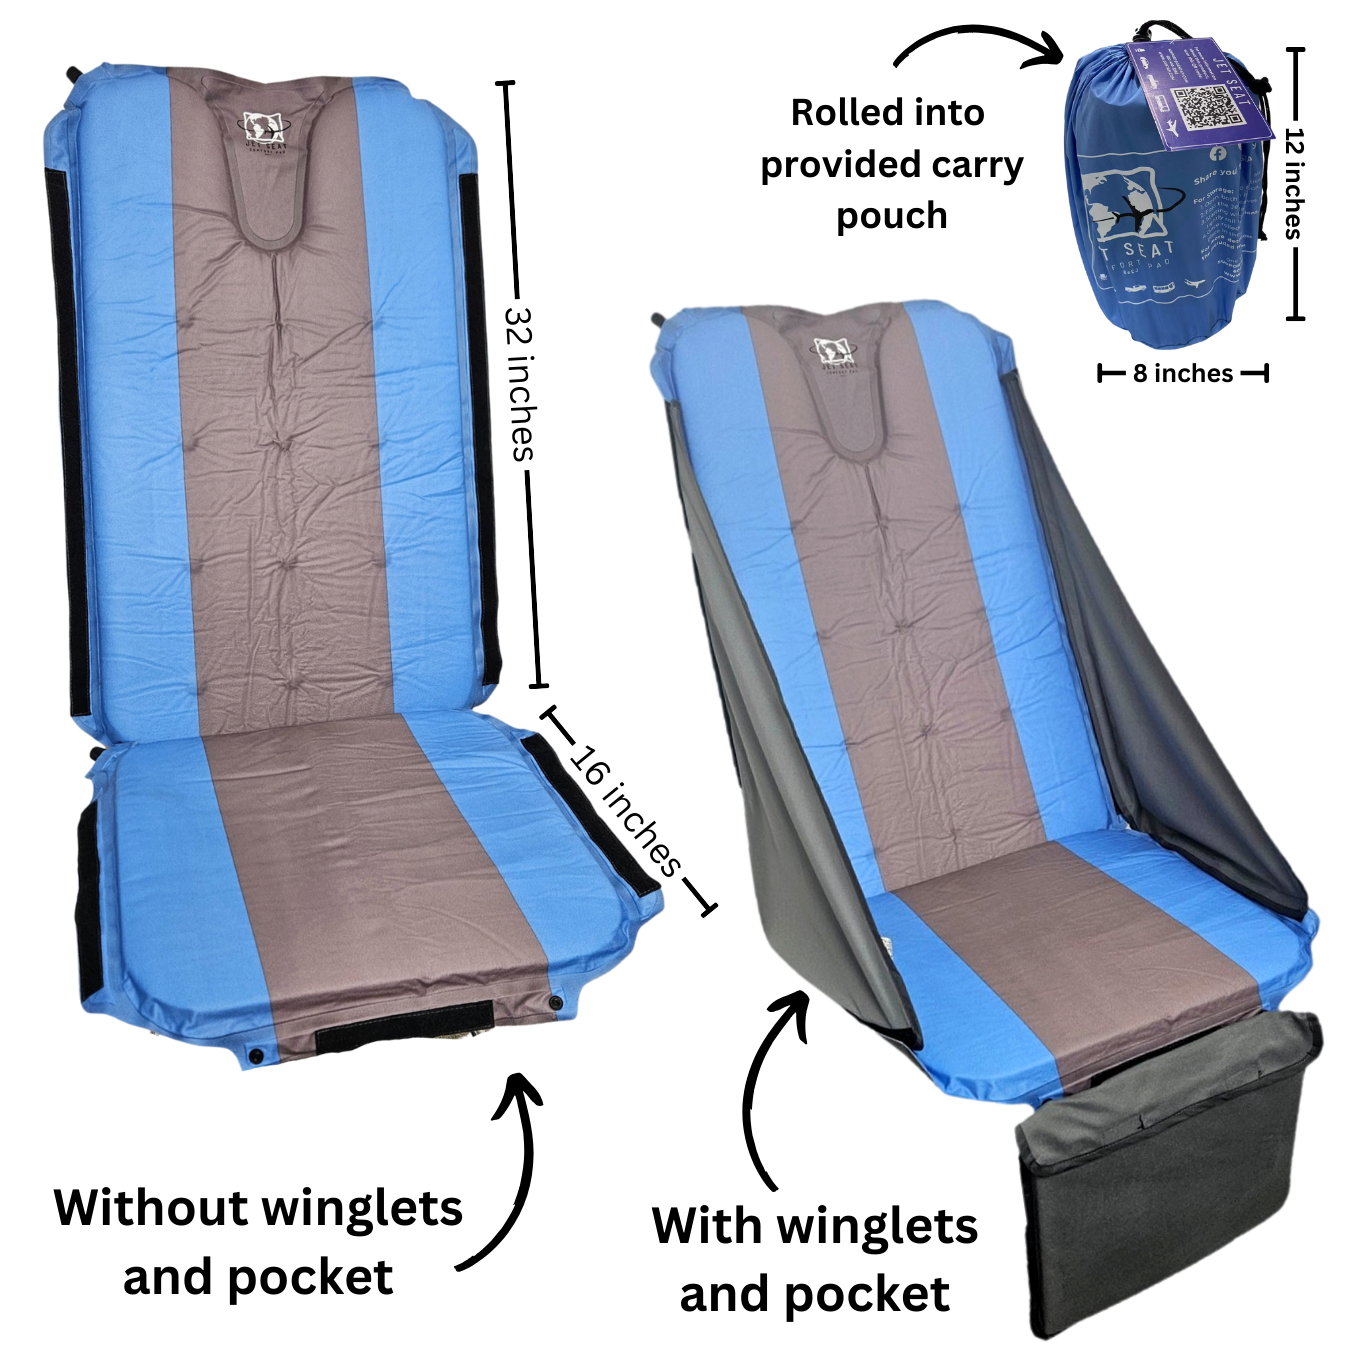 Jet Seat airplane cushion measurements with and without winglets and pocket, also shown rolled up into provided carry pounch